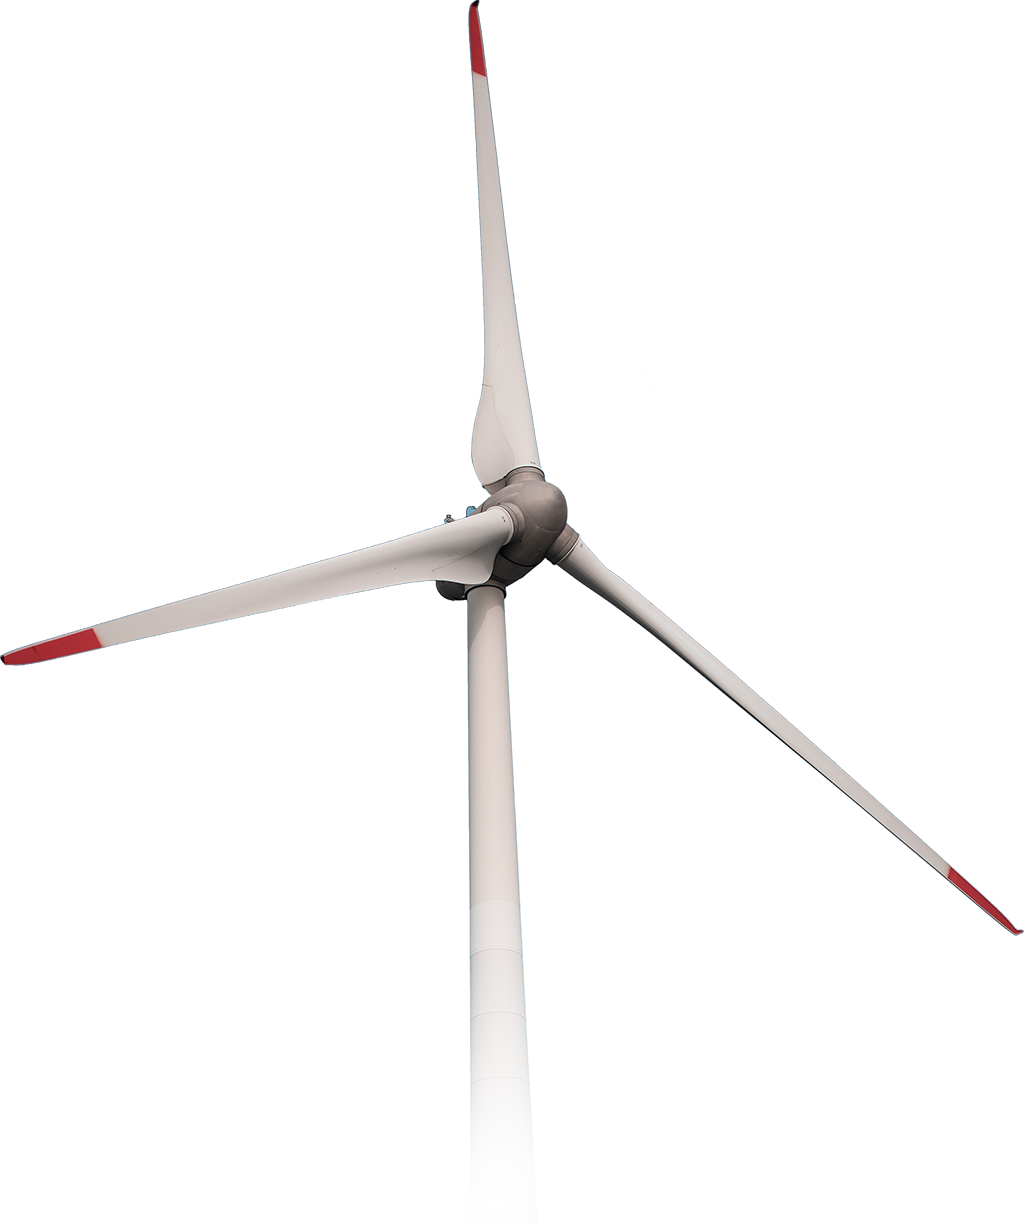 Unimacts is a leading manufacturer and supplier of wind energy products, parts, components, and replacements.